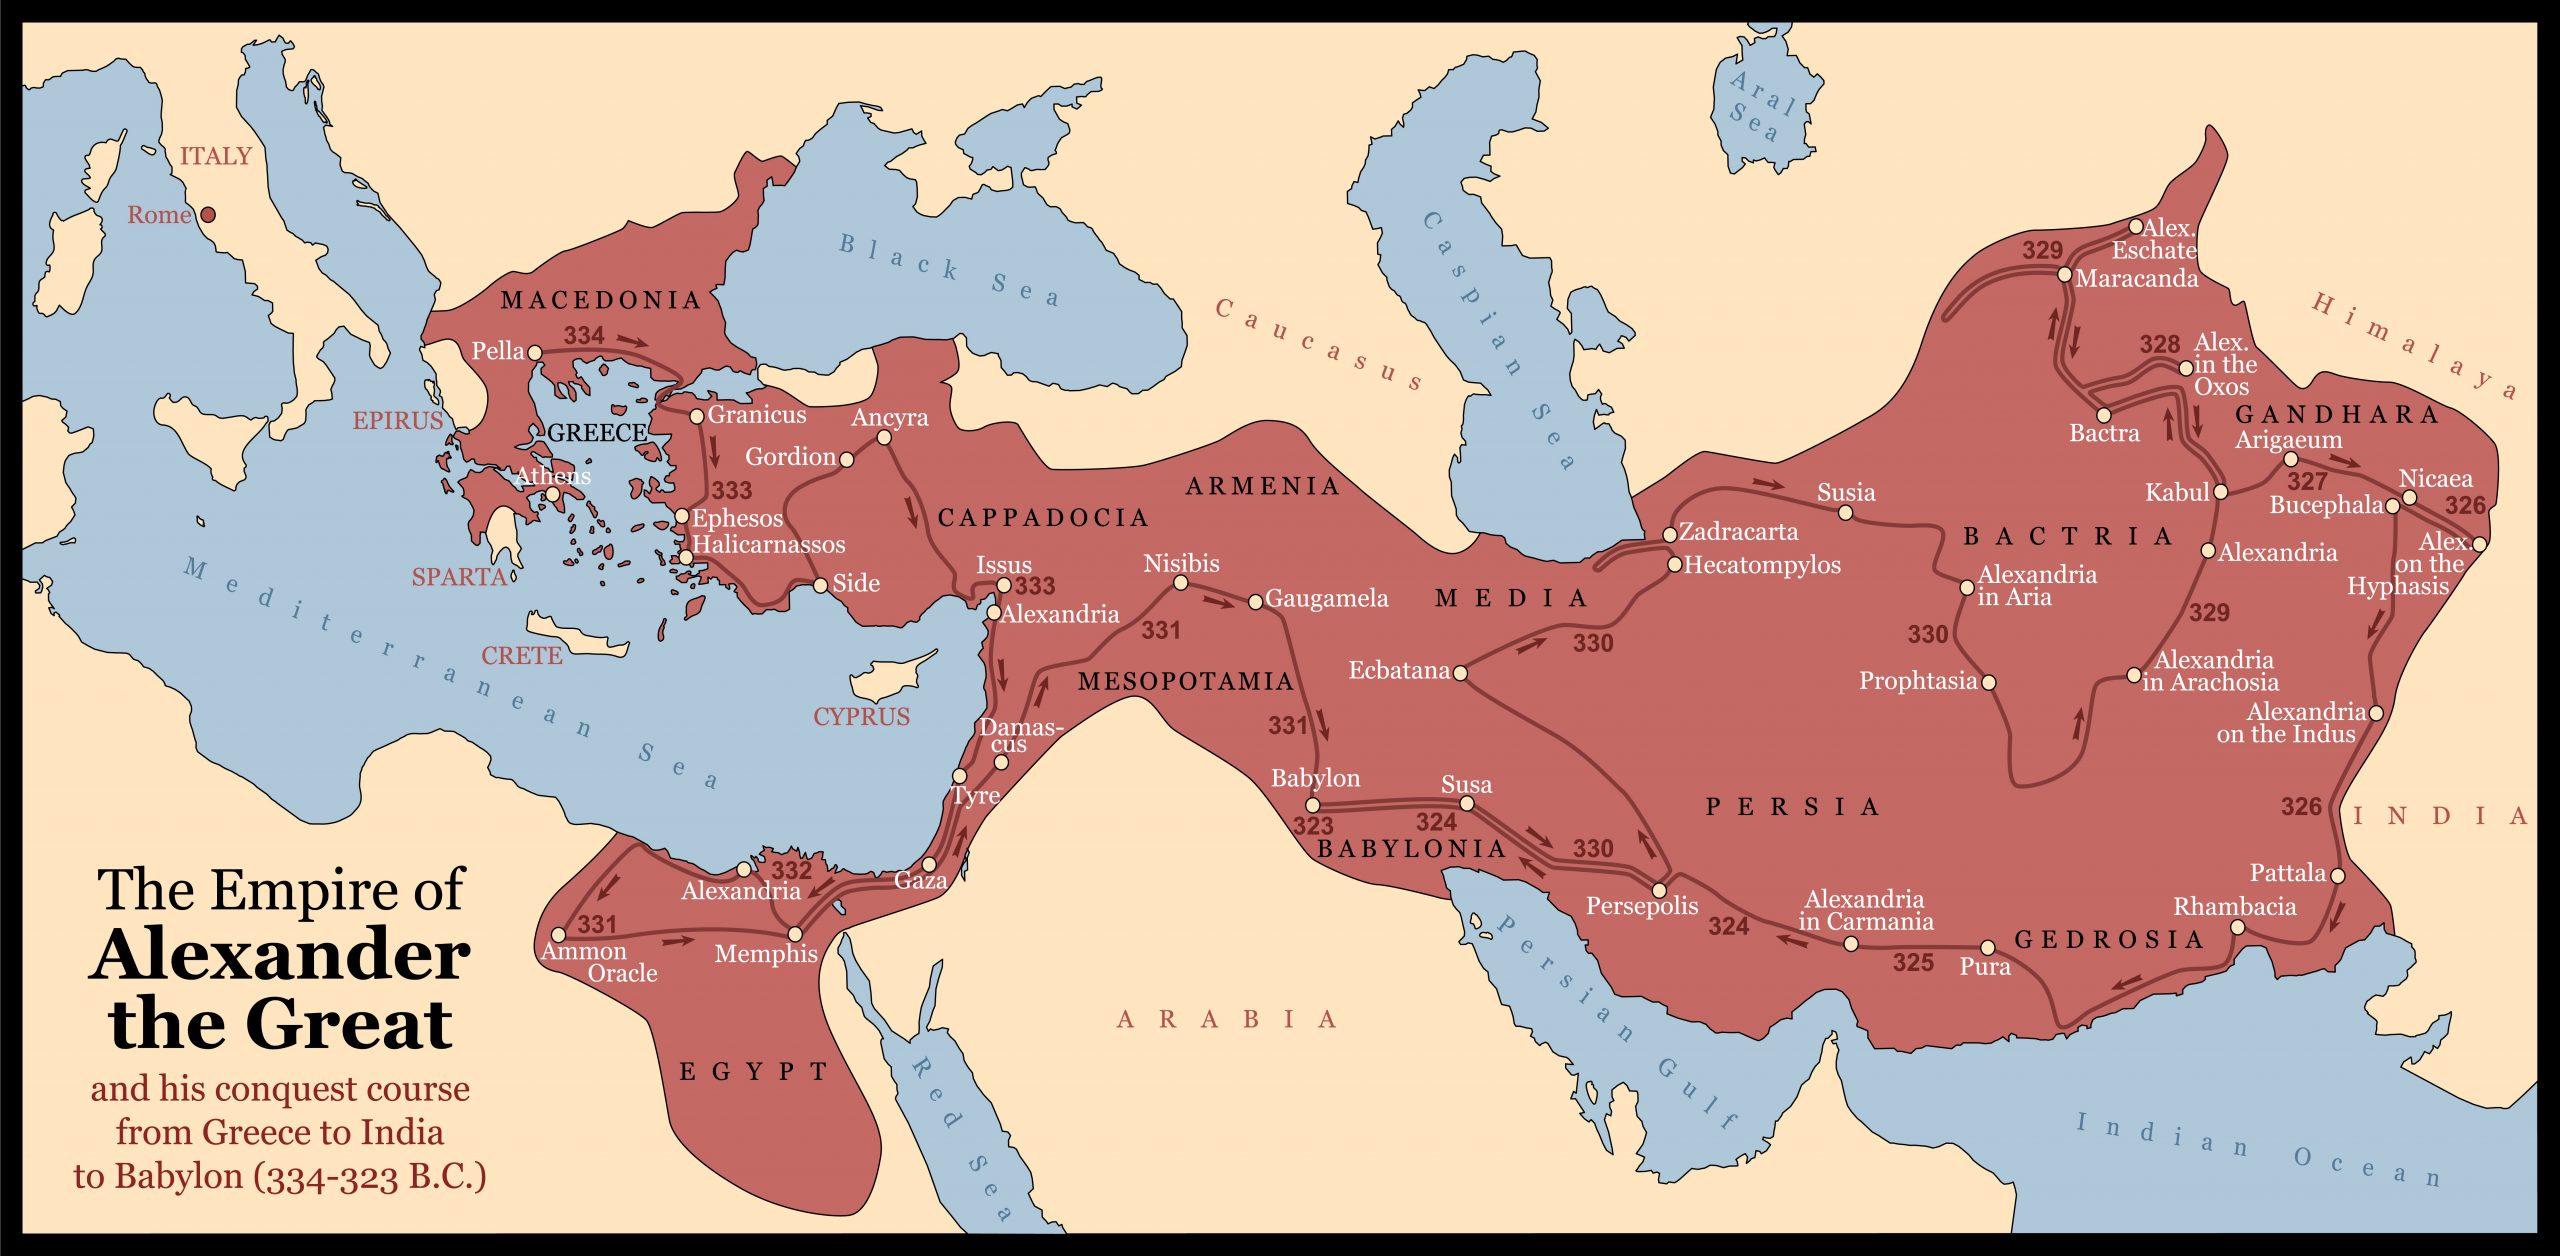 A map showing the empire of Alexander the Great. Depositphotos.